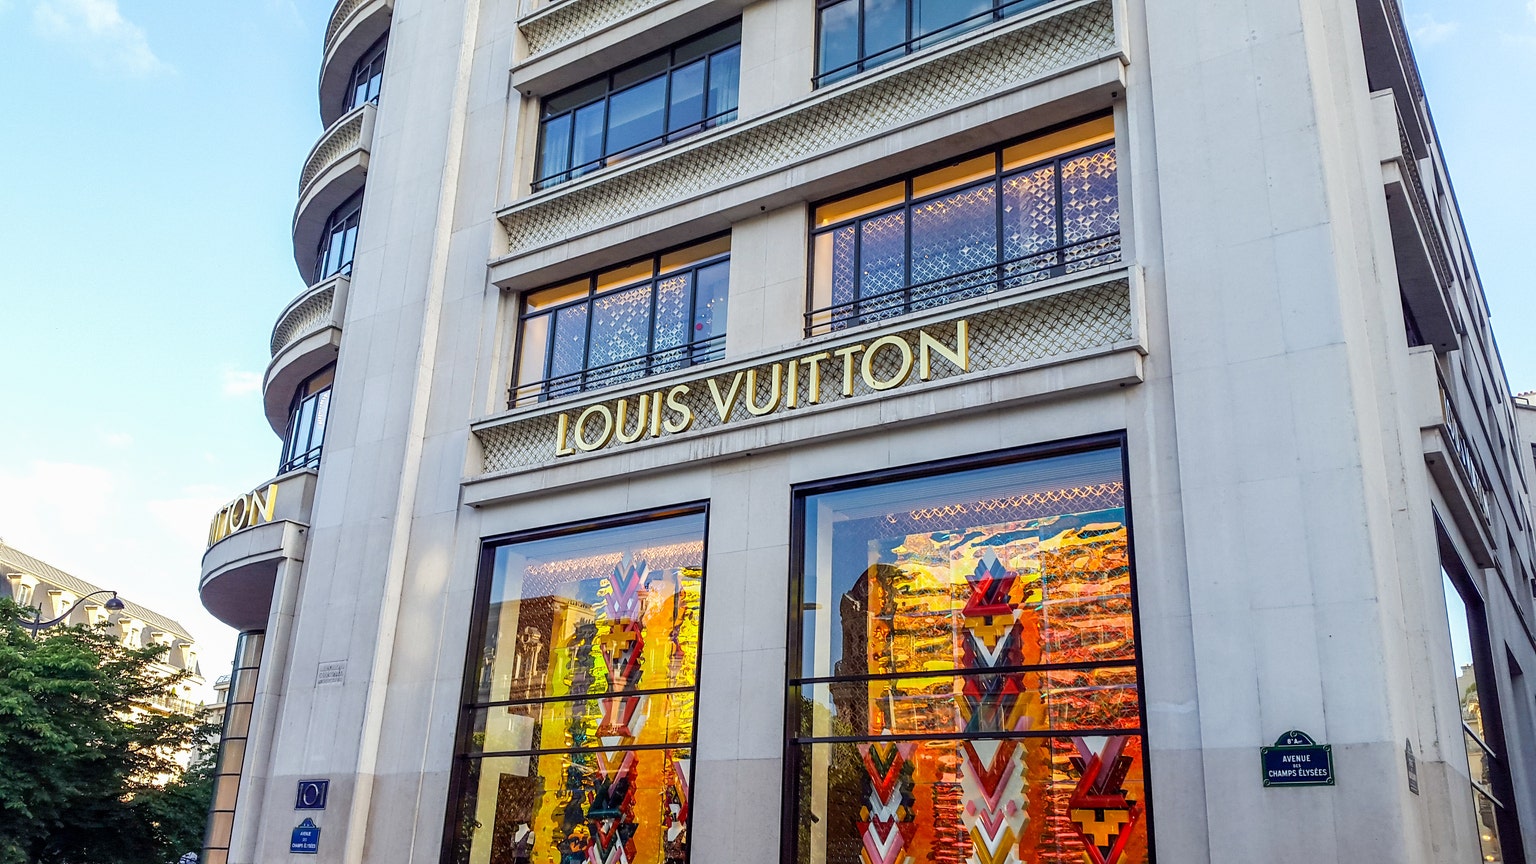 LVMH: An Investment Opportunity After It Fades from the Spotlight